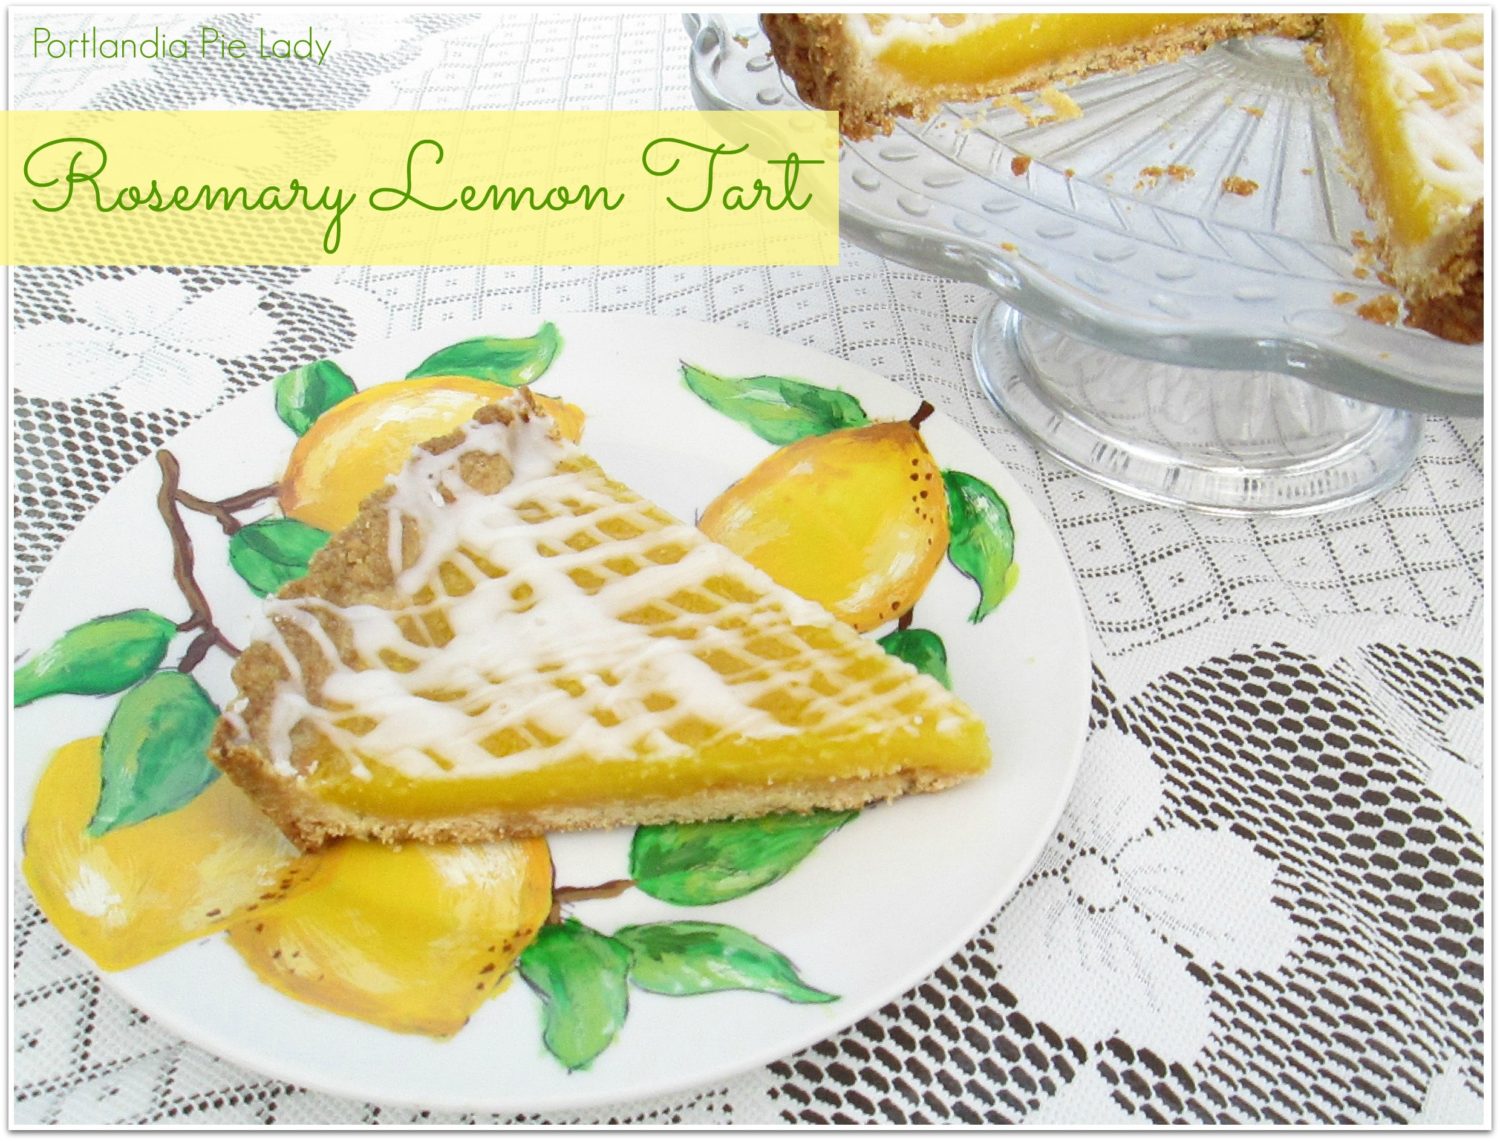 Luscious lemon curd filling, topped with a lemon drizzle, and baked in a rosemary-infused shortbread crust.  